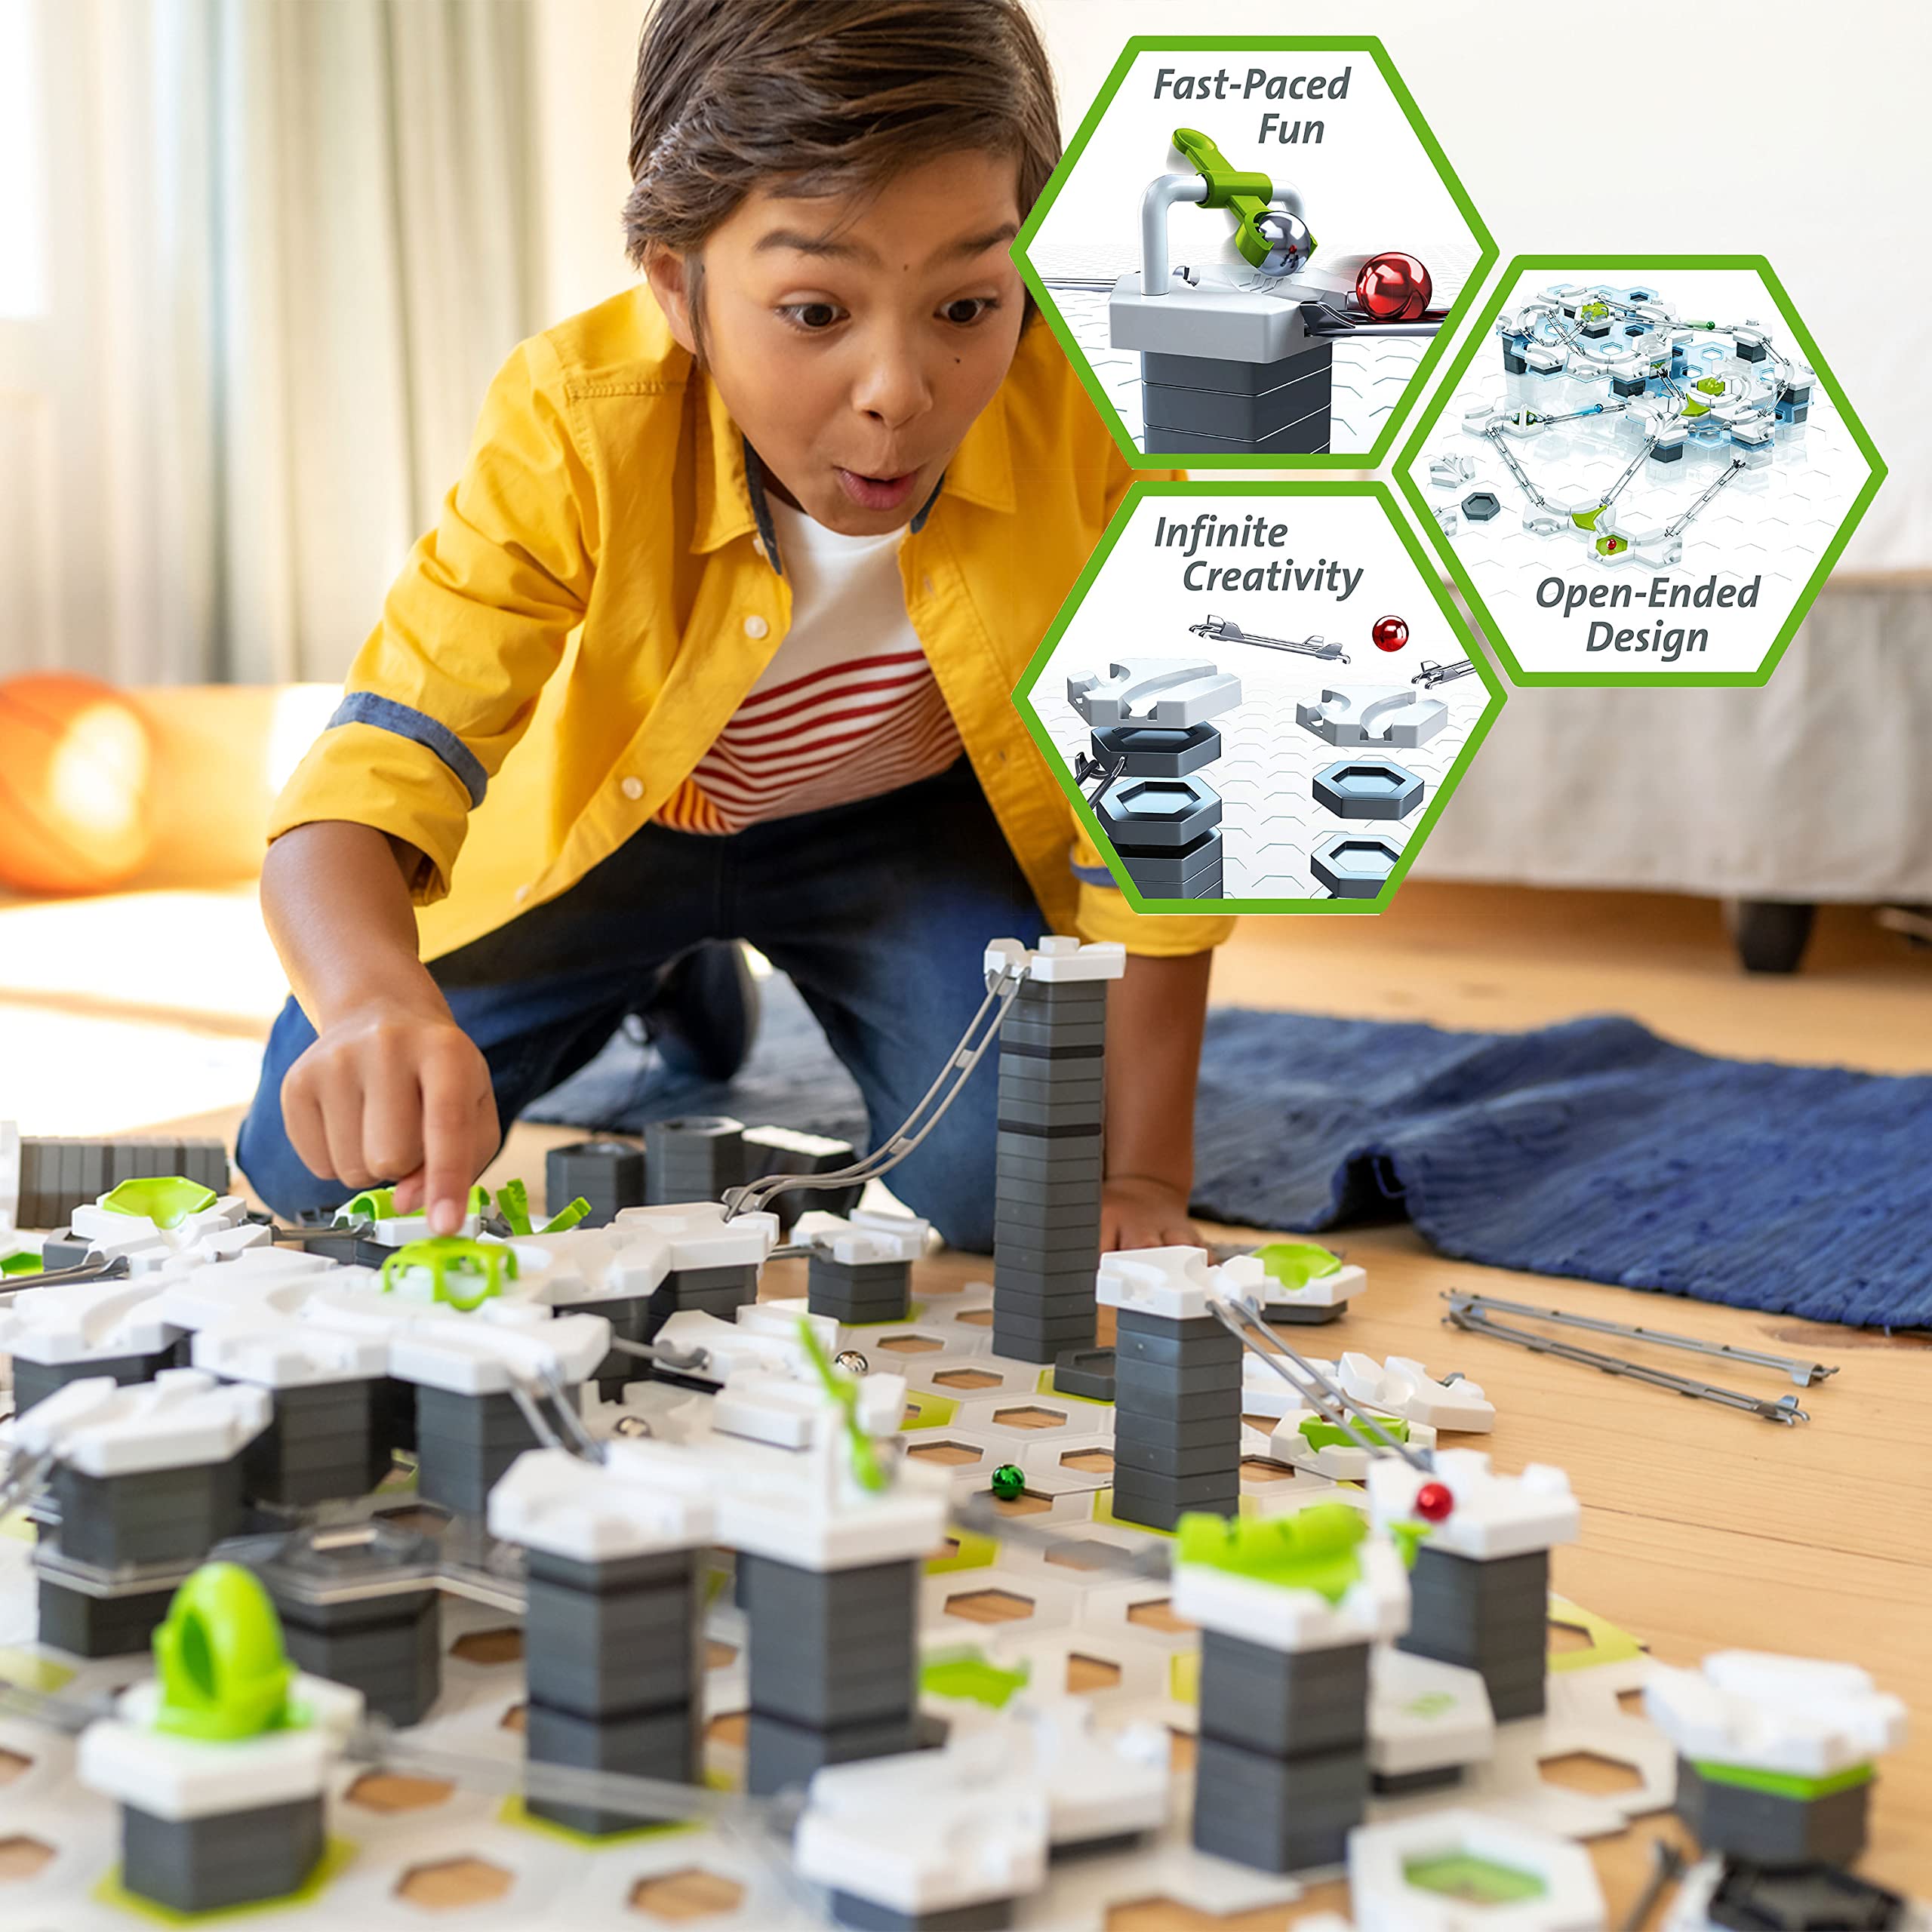 Ravensburger GraviTrax PRO Mixer Accessory - Marble Run and STEM Toy for Boys and Girls Age 8 and Up - Accessory for 2019 Toy of The Year Finalist GraviTrax, Black